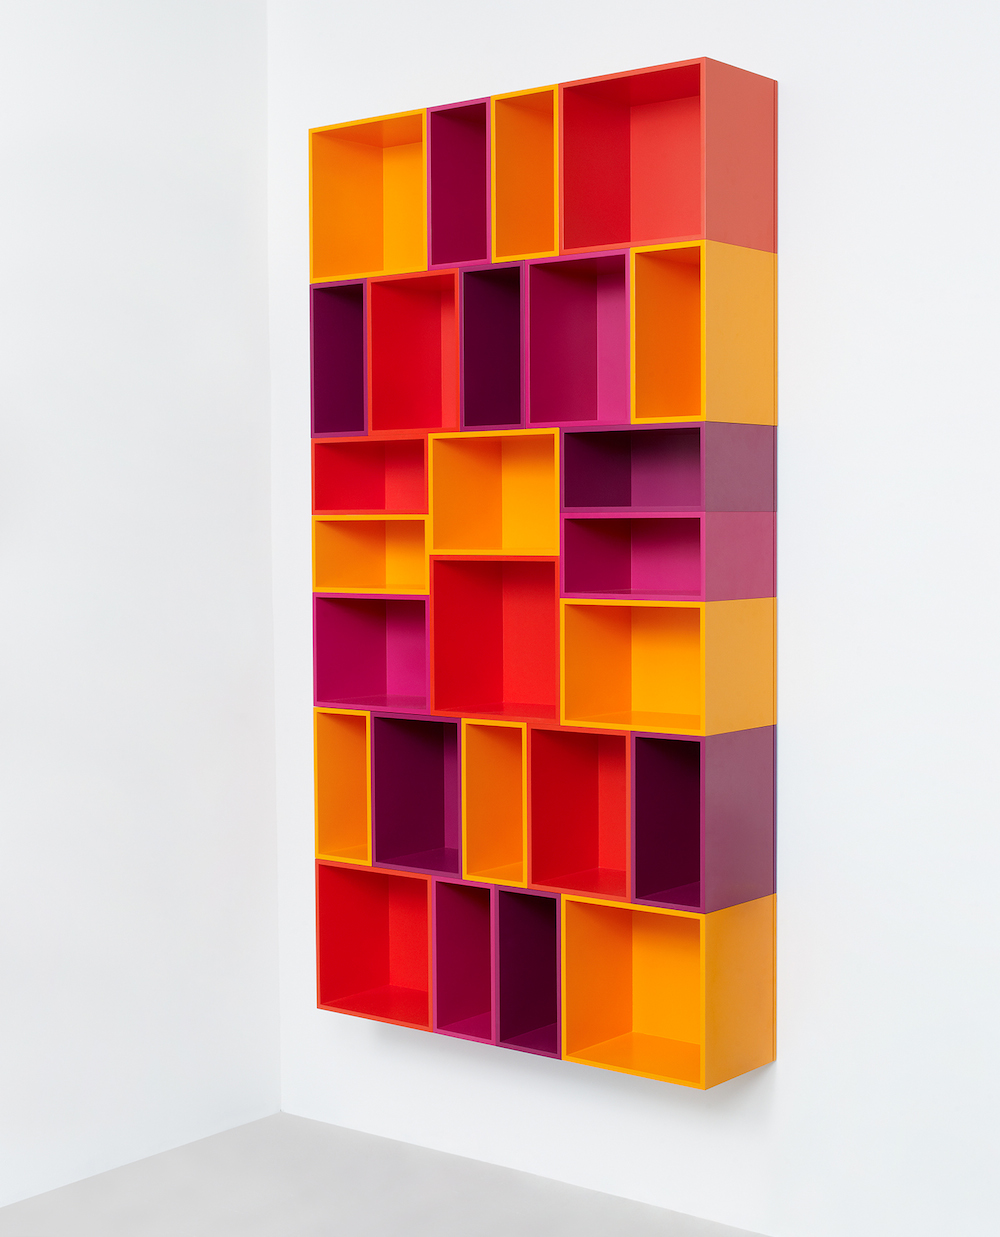 Vertical Cubit Shelf Configuration in Red, Orange, Yellow and Purple